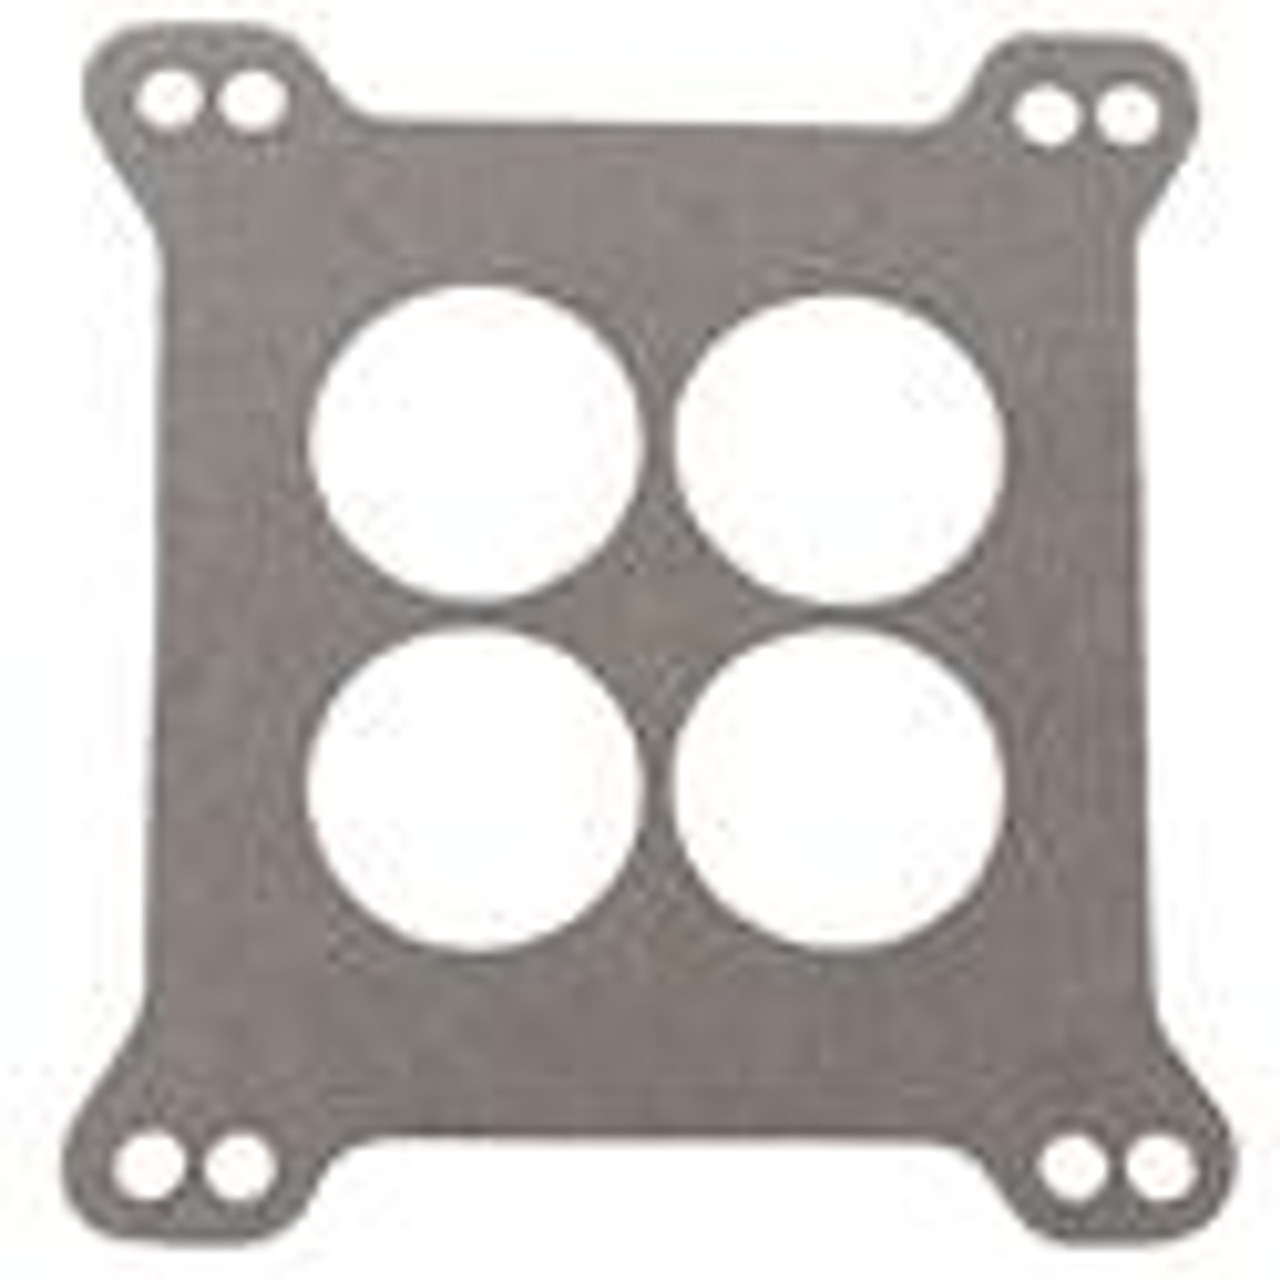  4150 Base Plate Carburetor Mounting Gasket, 4-Barrel, Square Bore, 4-Hole, .063 in. Thick, Each